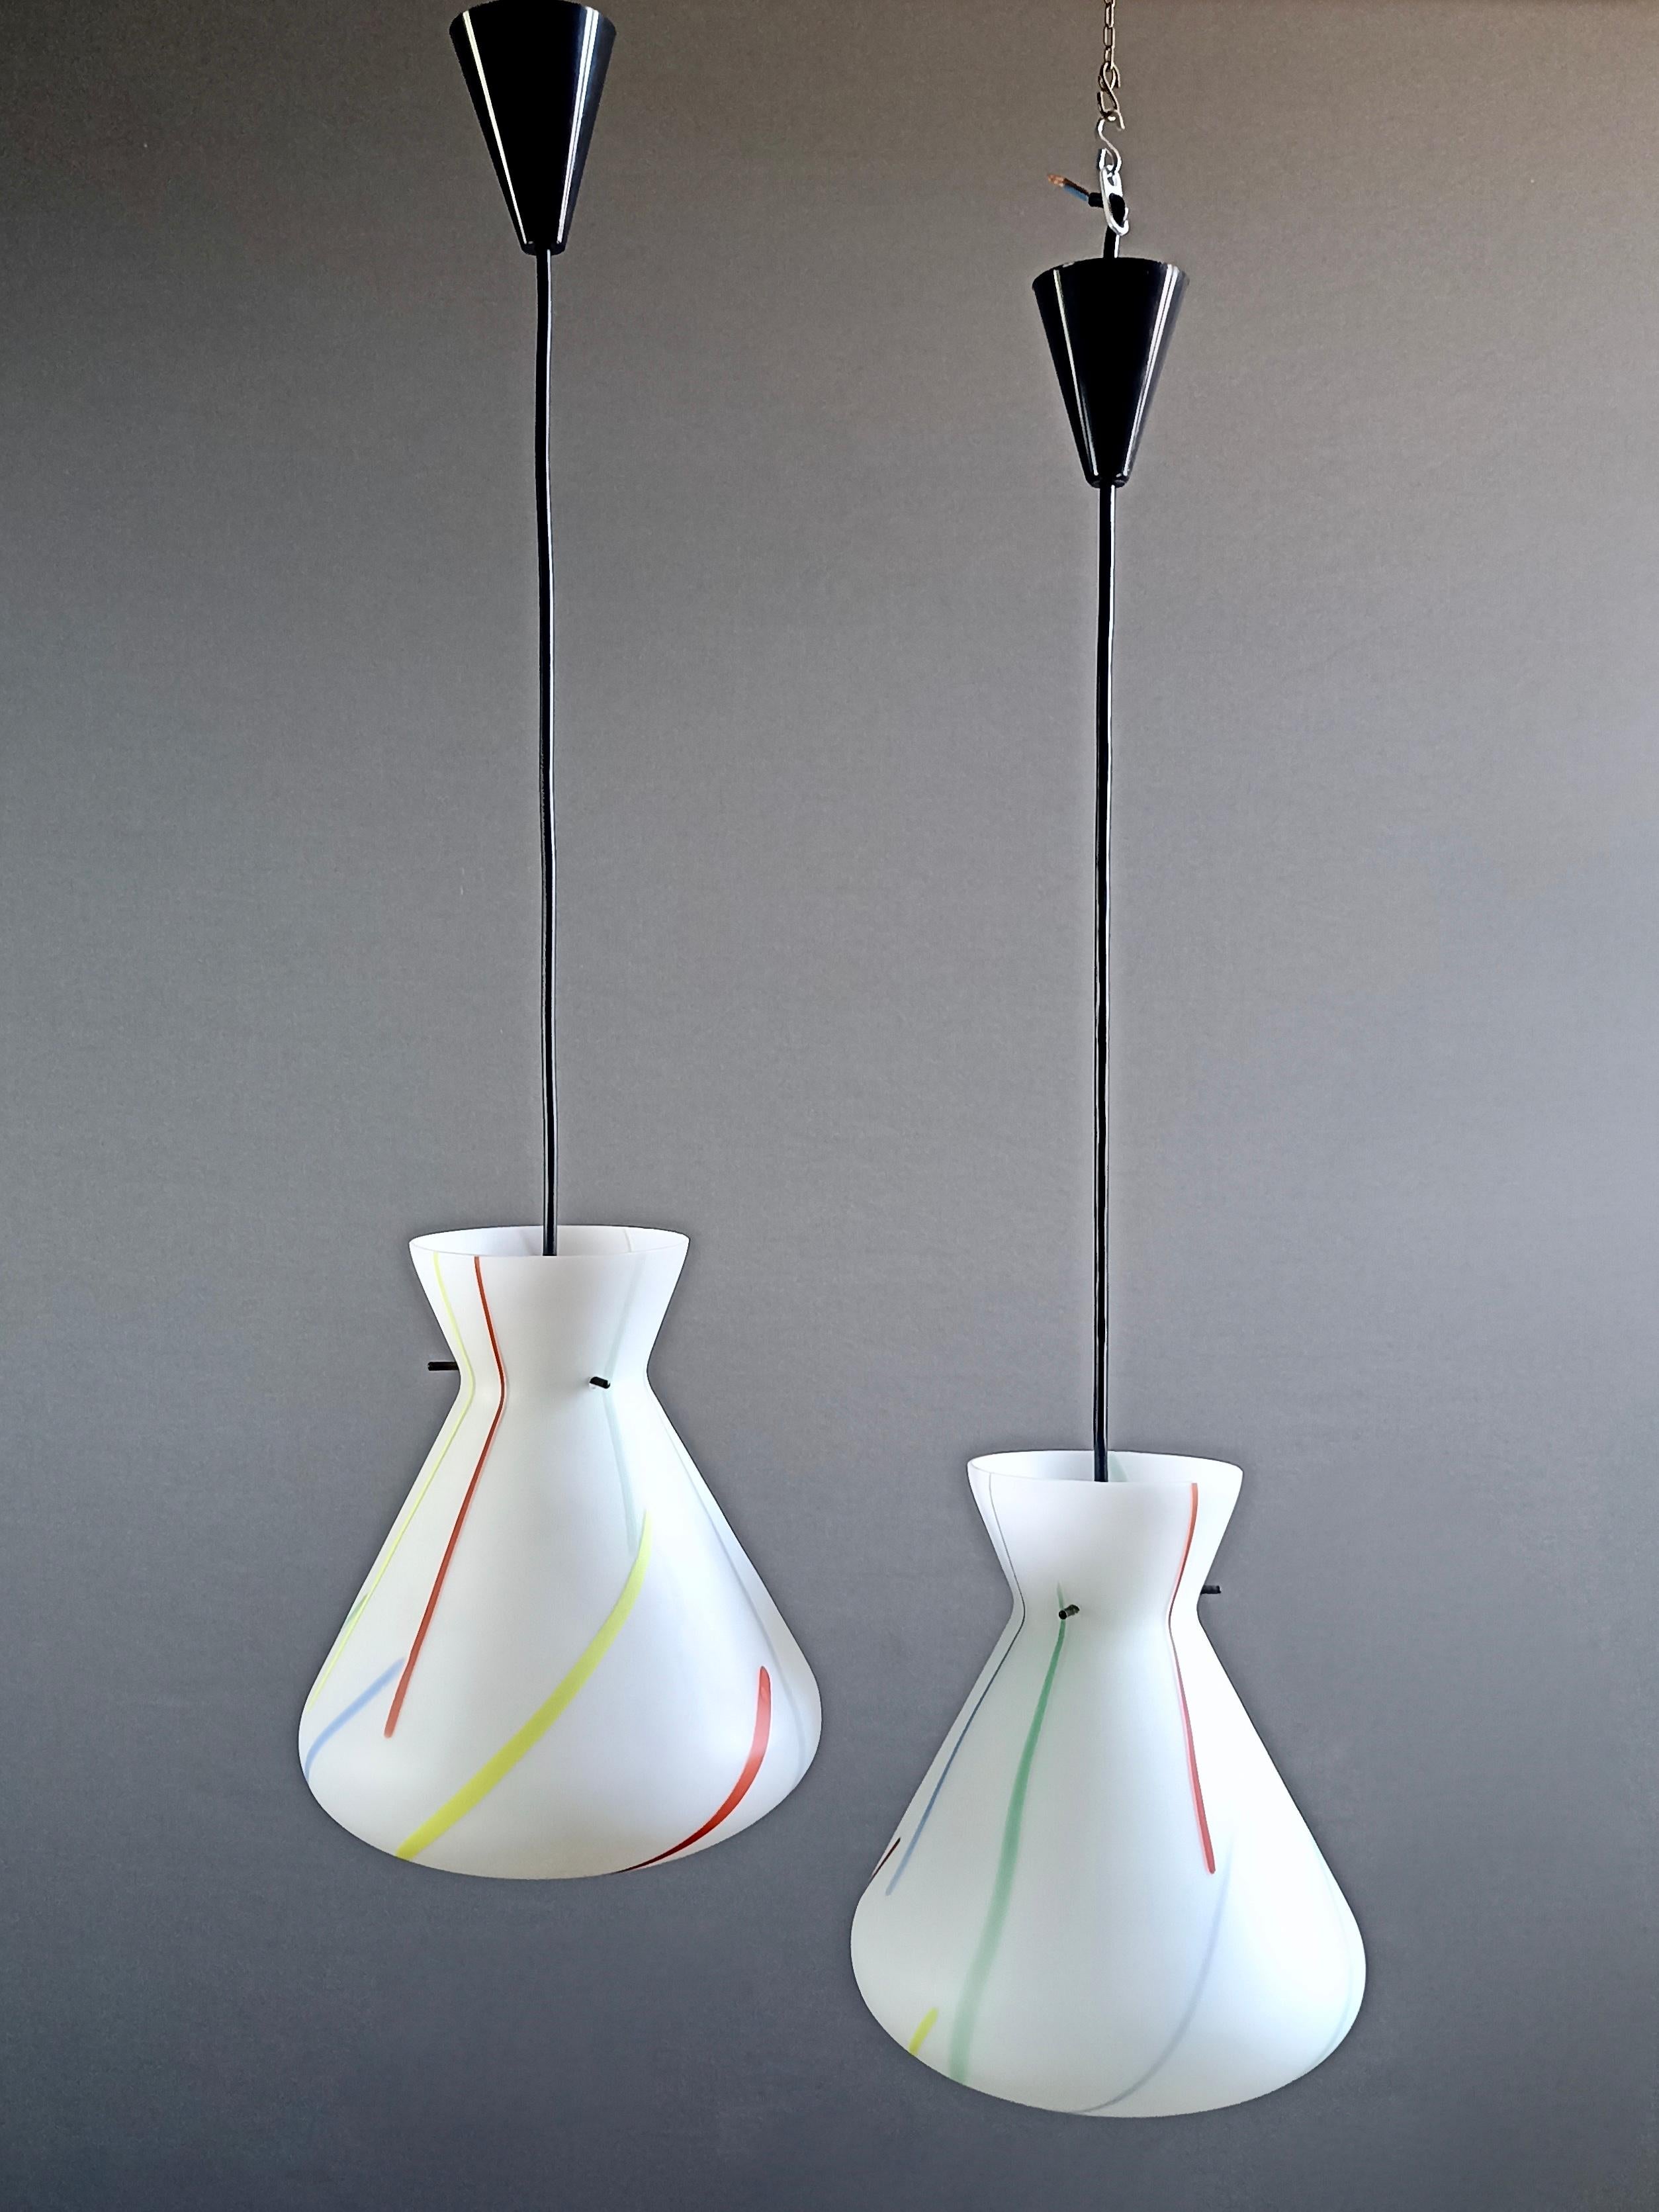 A charming pair of one-light multi-color glass ceiling lamps. Their elegant profile is characteristic of 1950s Italian design lamps and refers to Stilnovo style.
The twin lamps, with the same size and shape, are in cased white opaline matte Murano